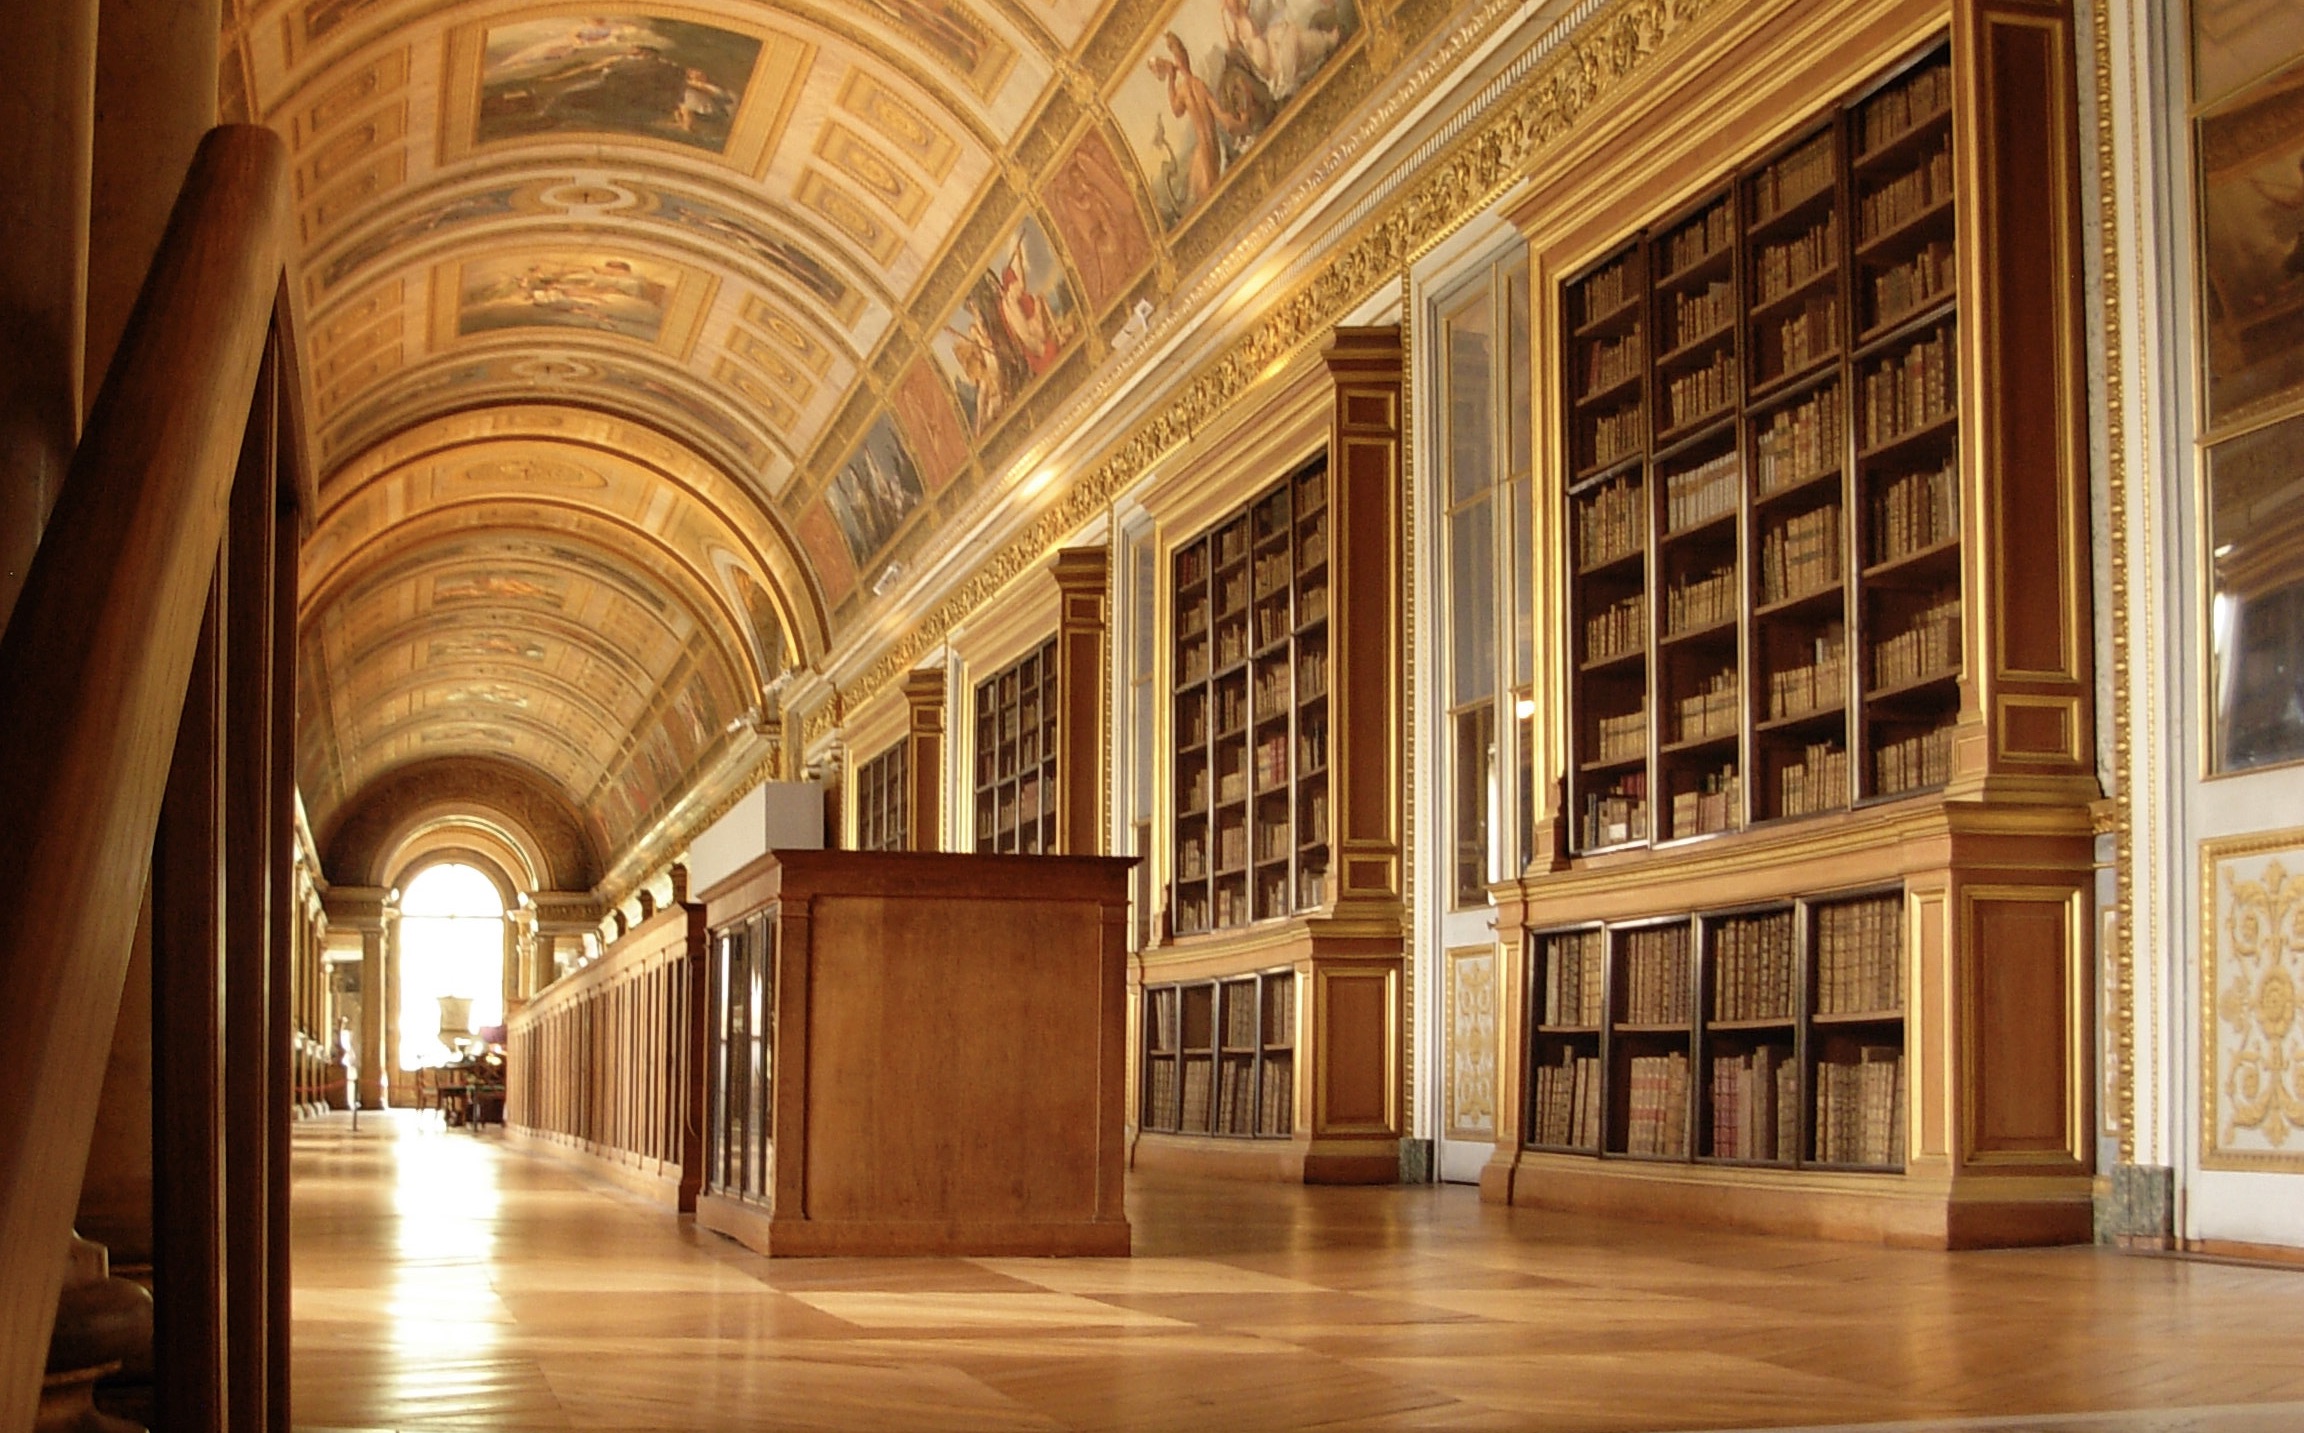 Library of the Royal Chateau at Fontainebleau, France.